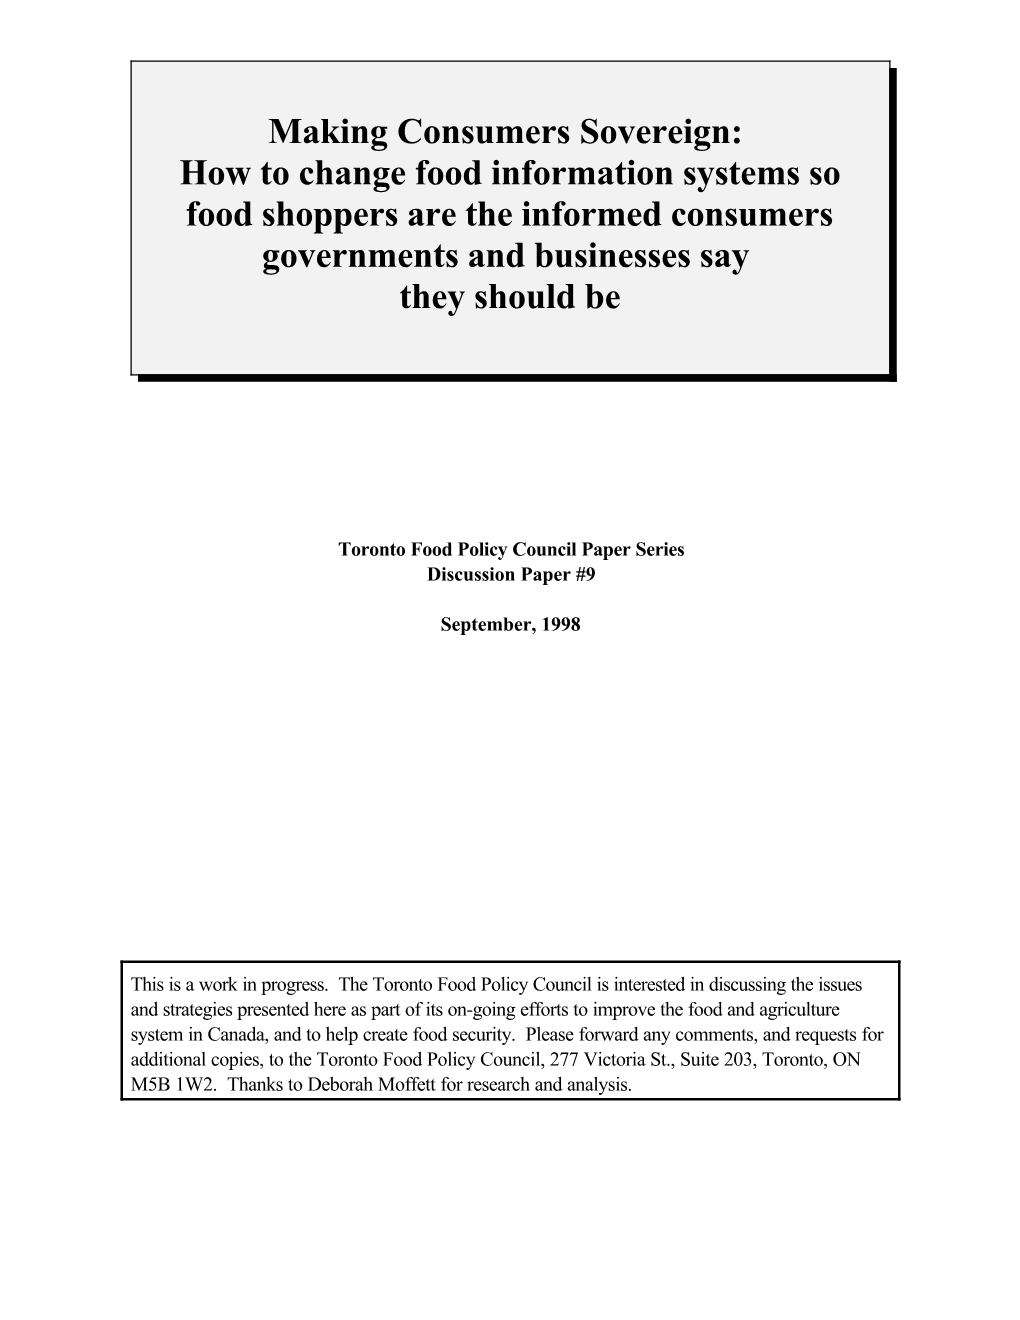 Making Consumers Sovereign: How to Change Food Information Systems So Food Shoppers Are the Informed Consumers Governments and Businesses Say They Should Be